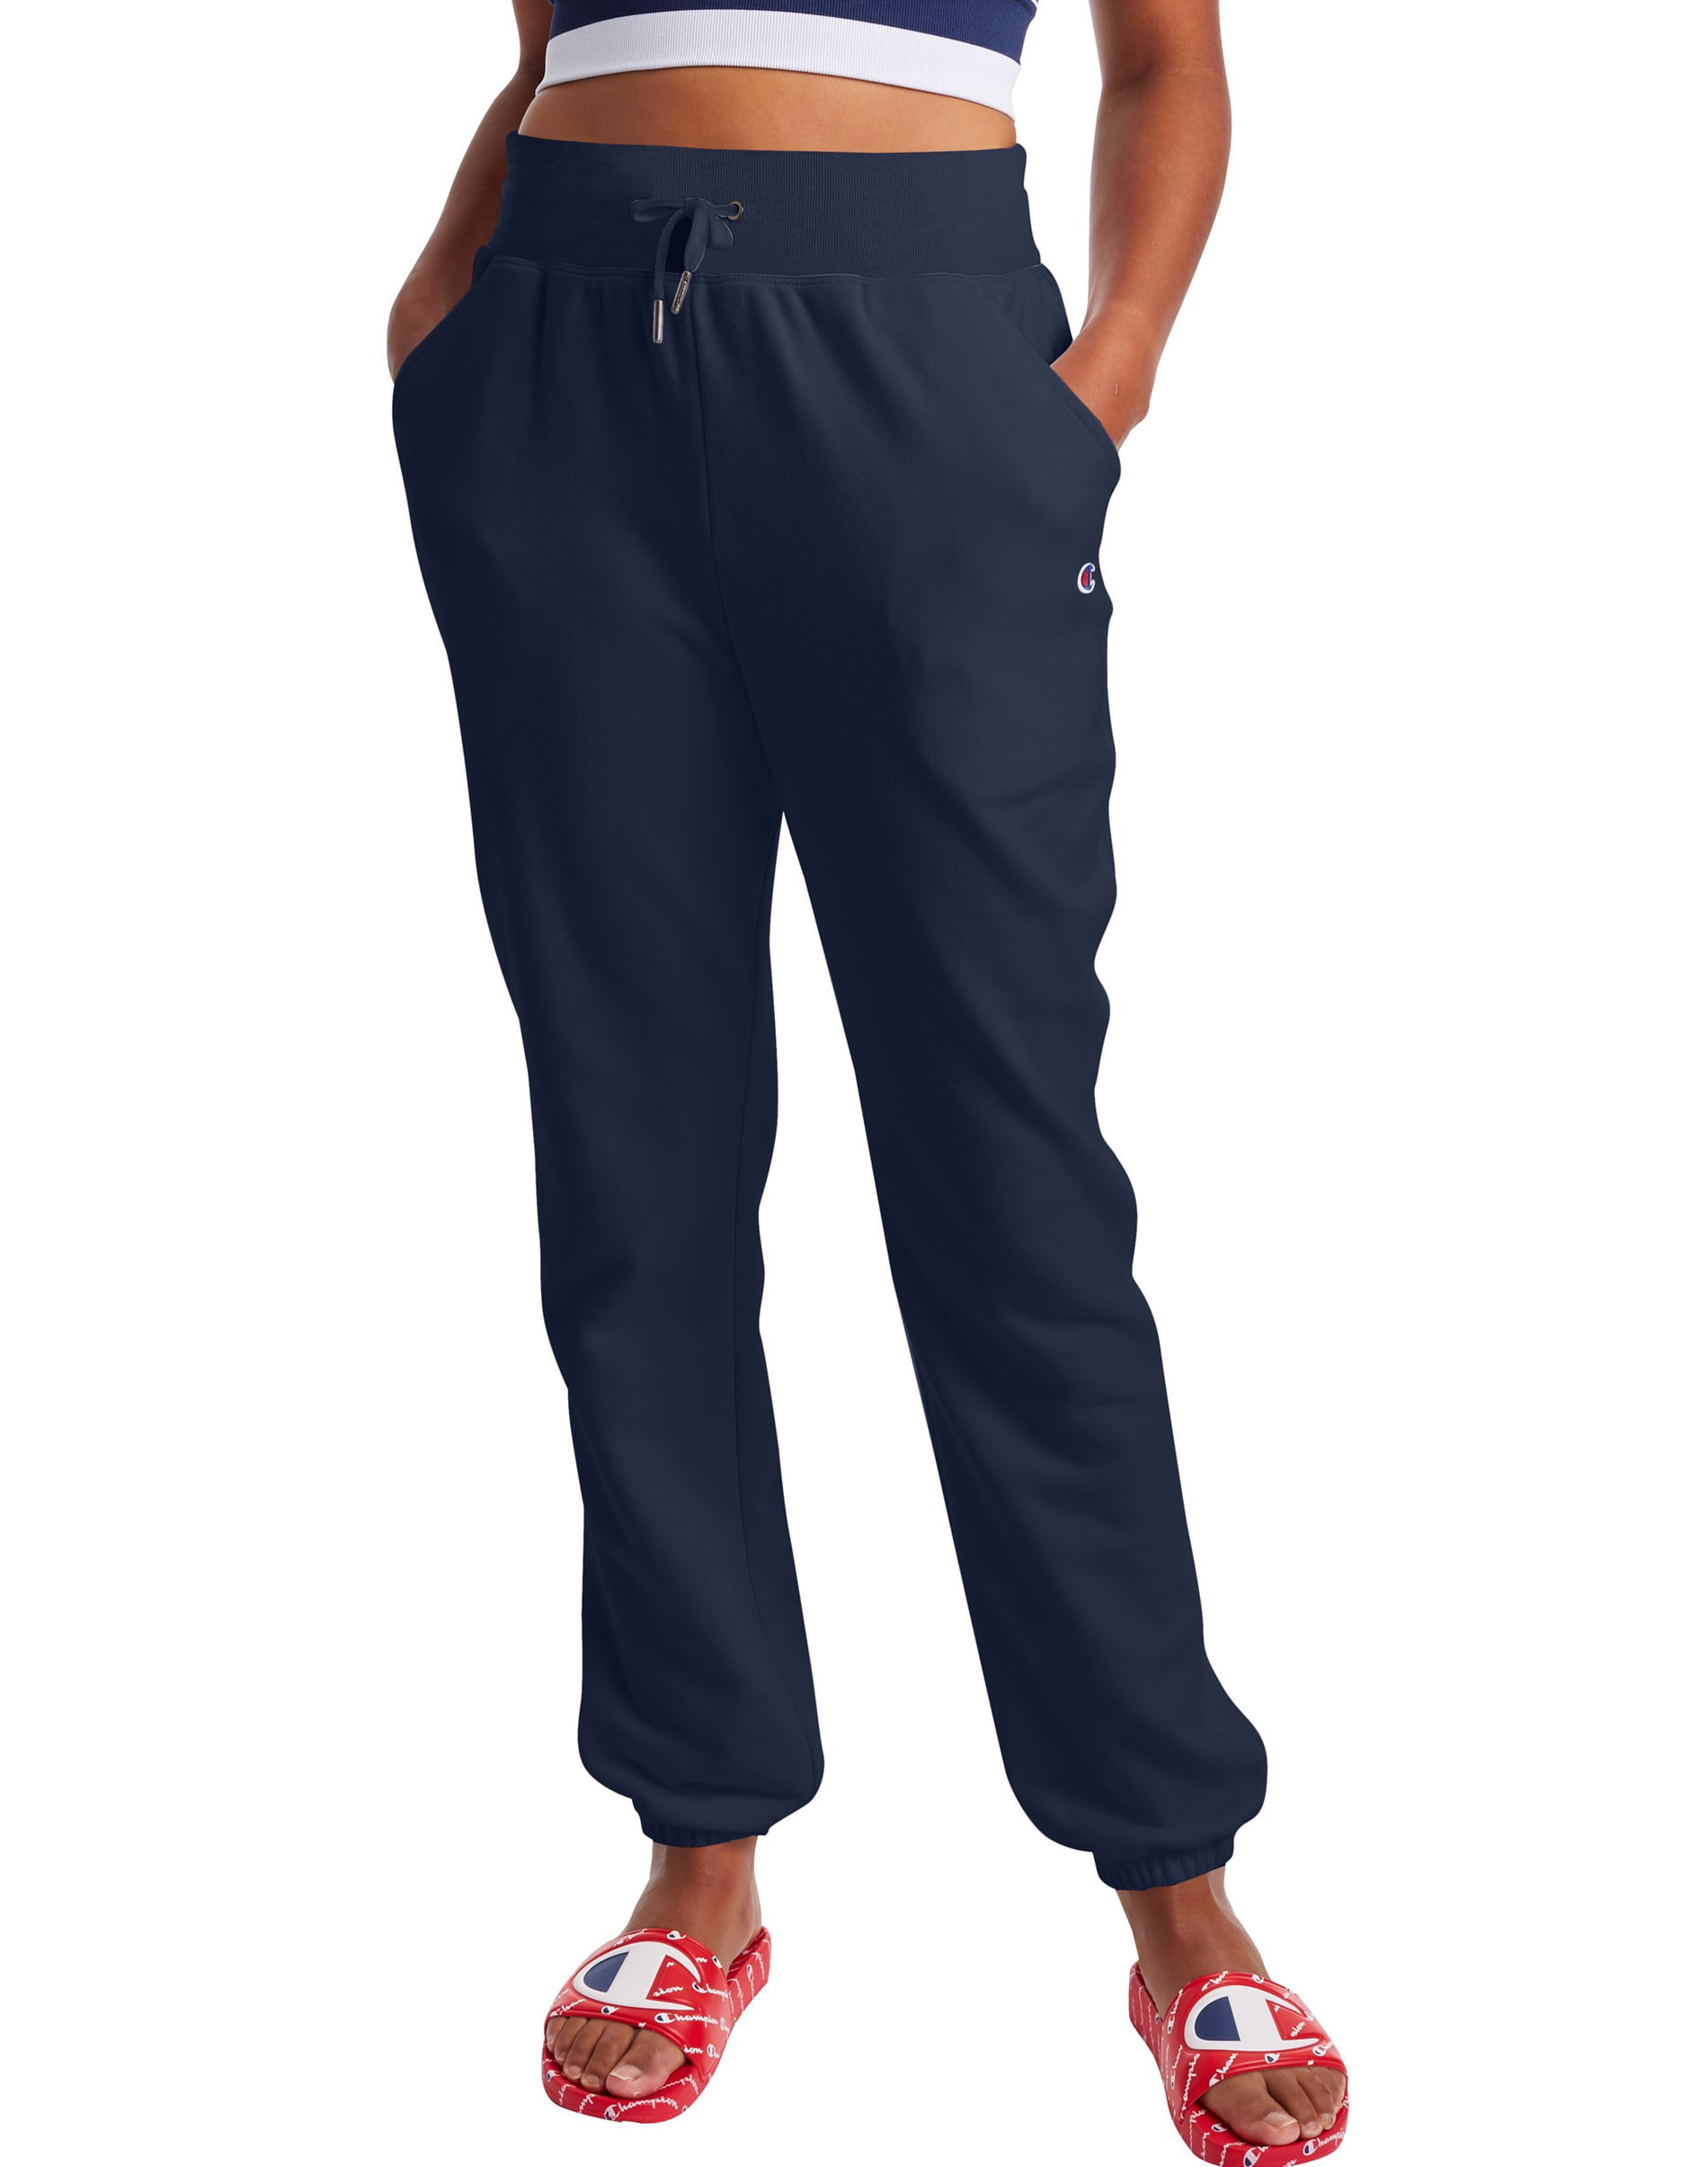 Champion Womens Campus French Terry Sweatpants, XL, Athletic Navy